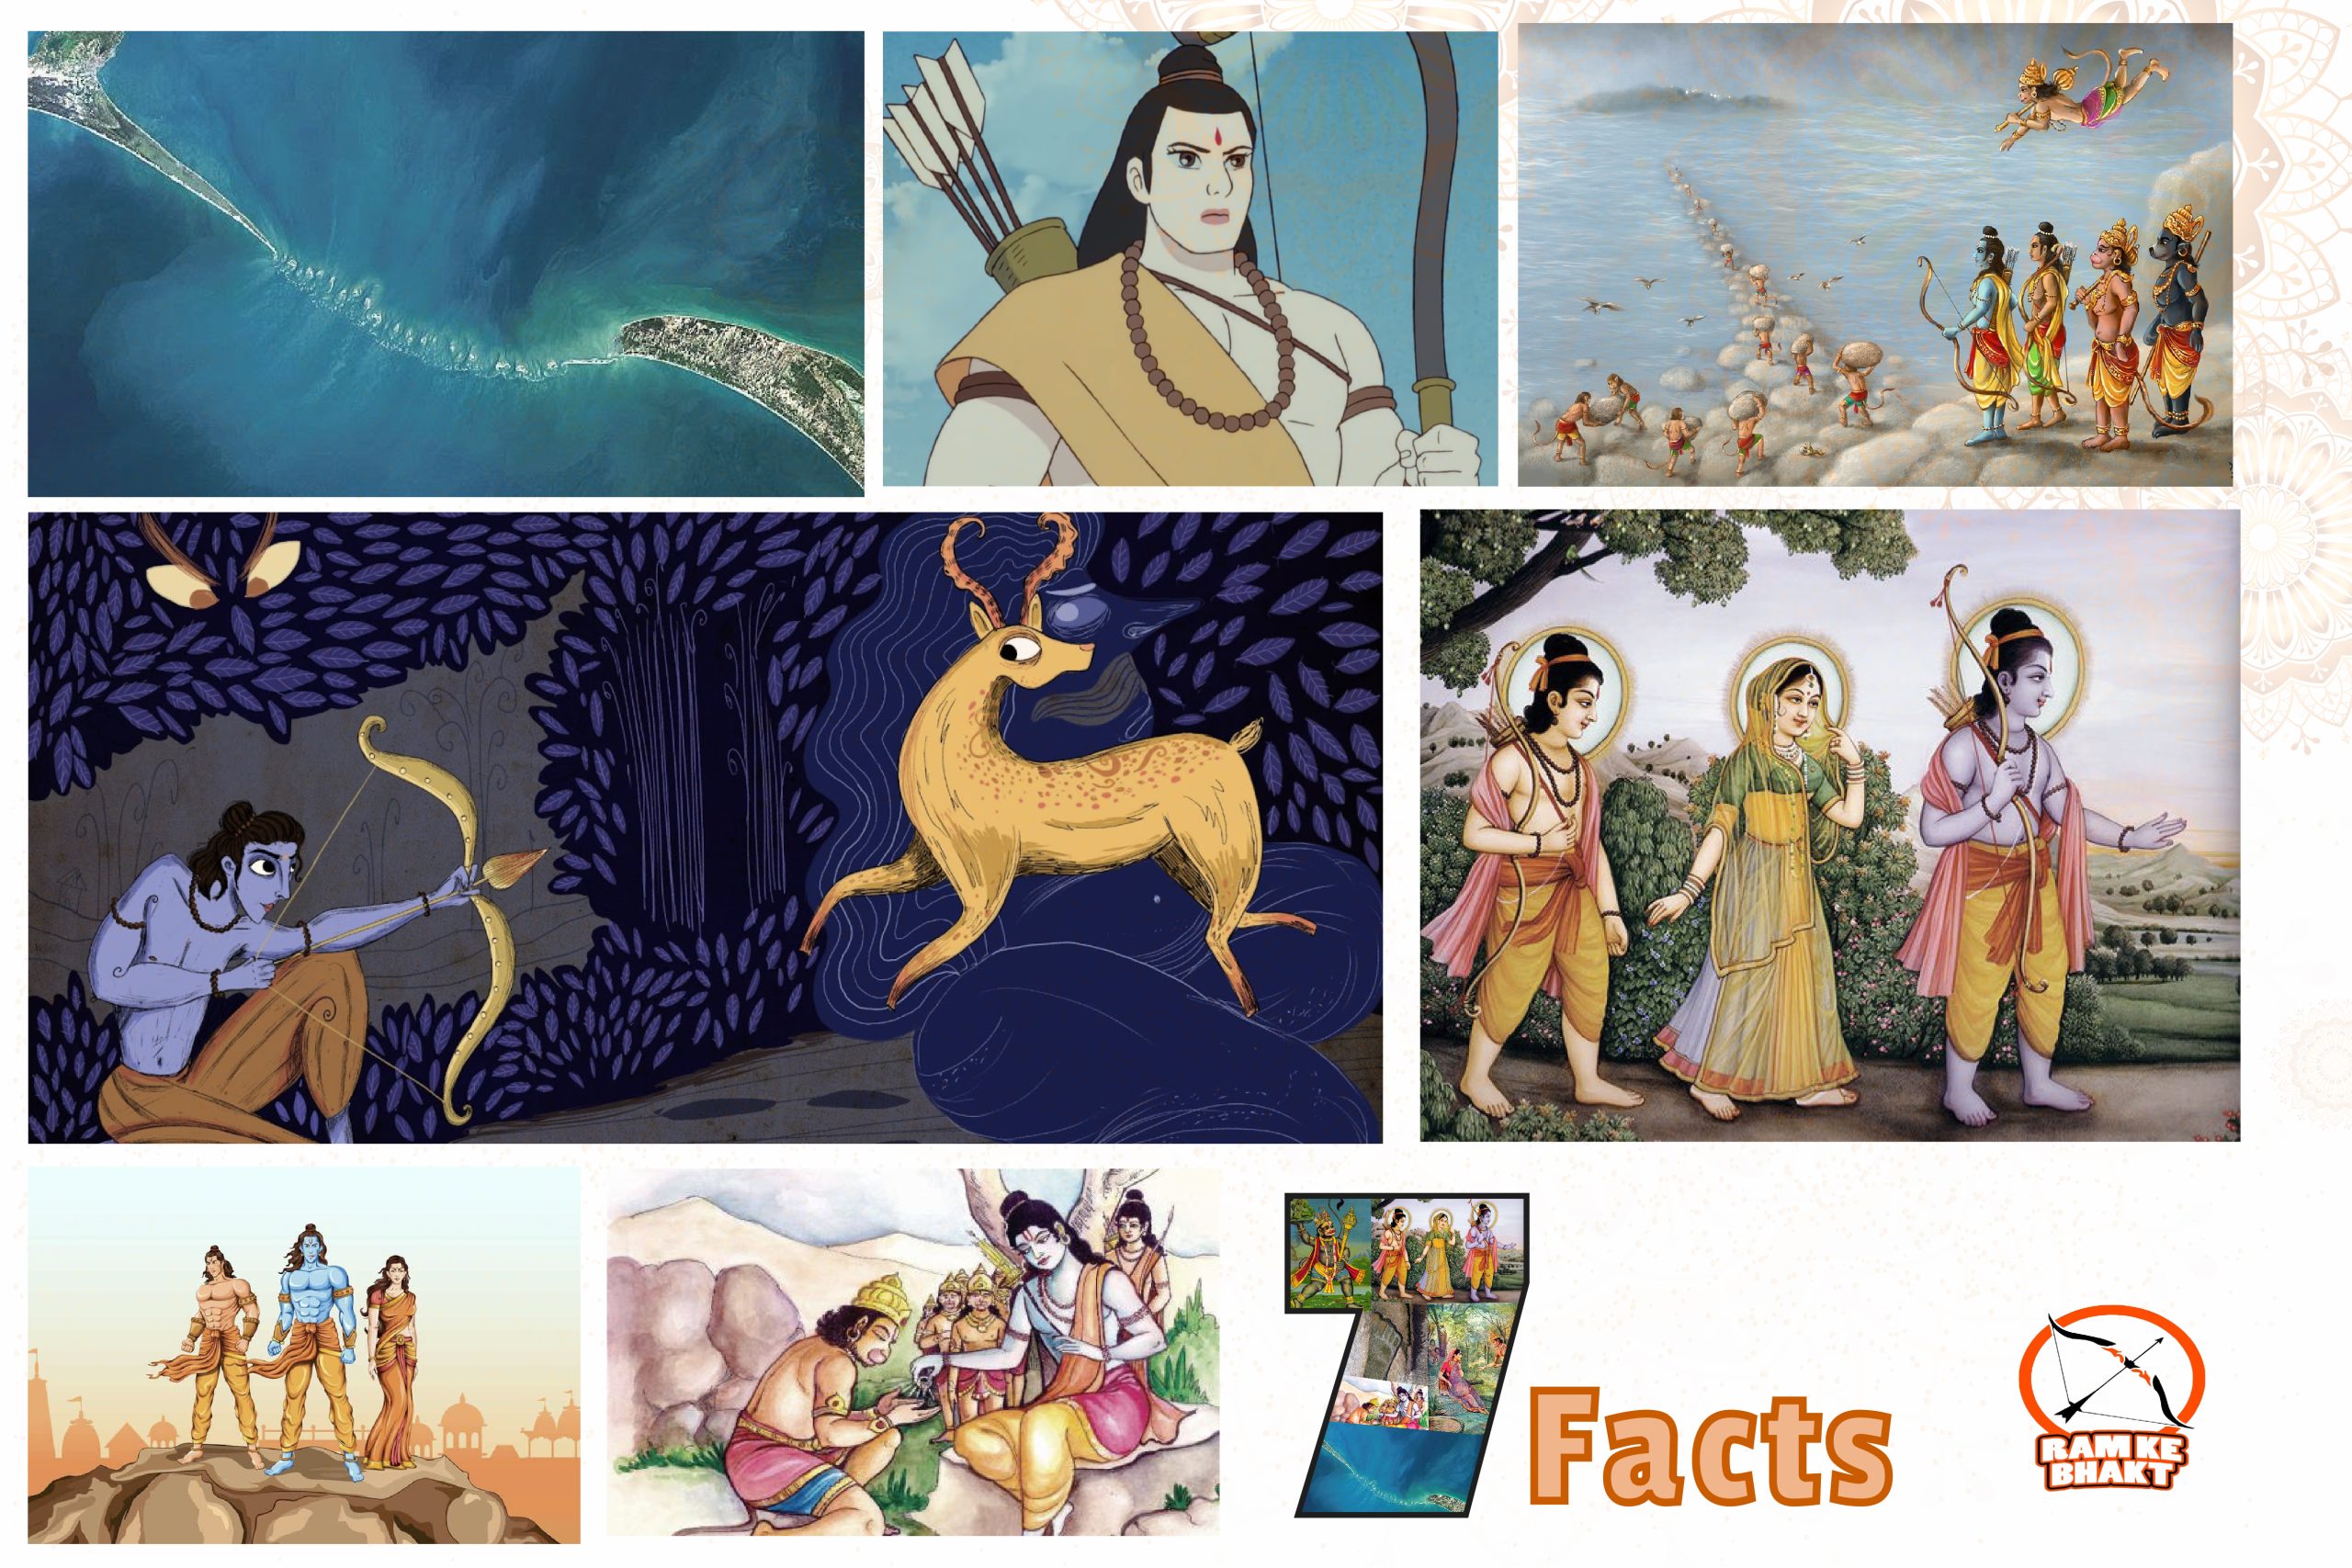 7 Surprising Facts That Could Prove The Ramayana Isn’t Just A Myth